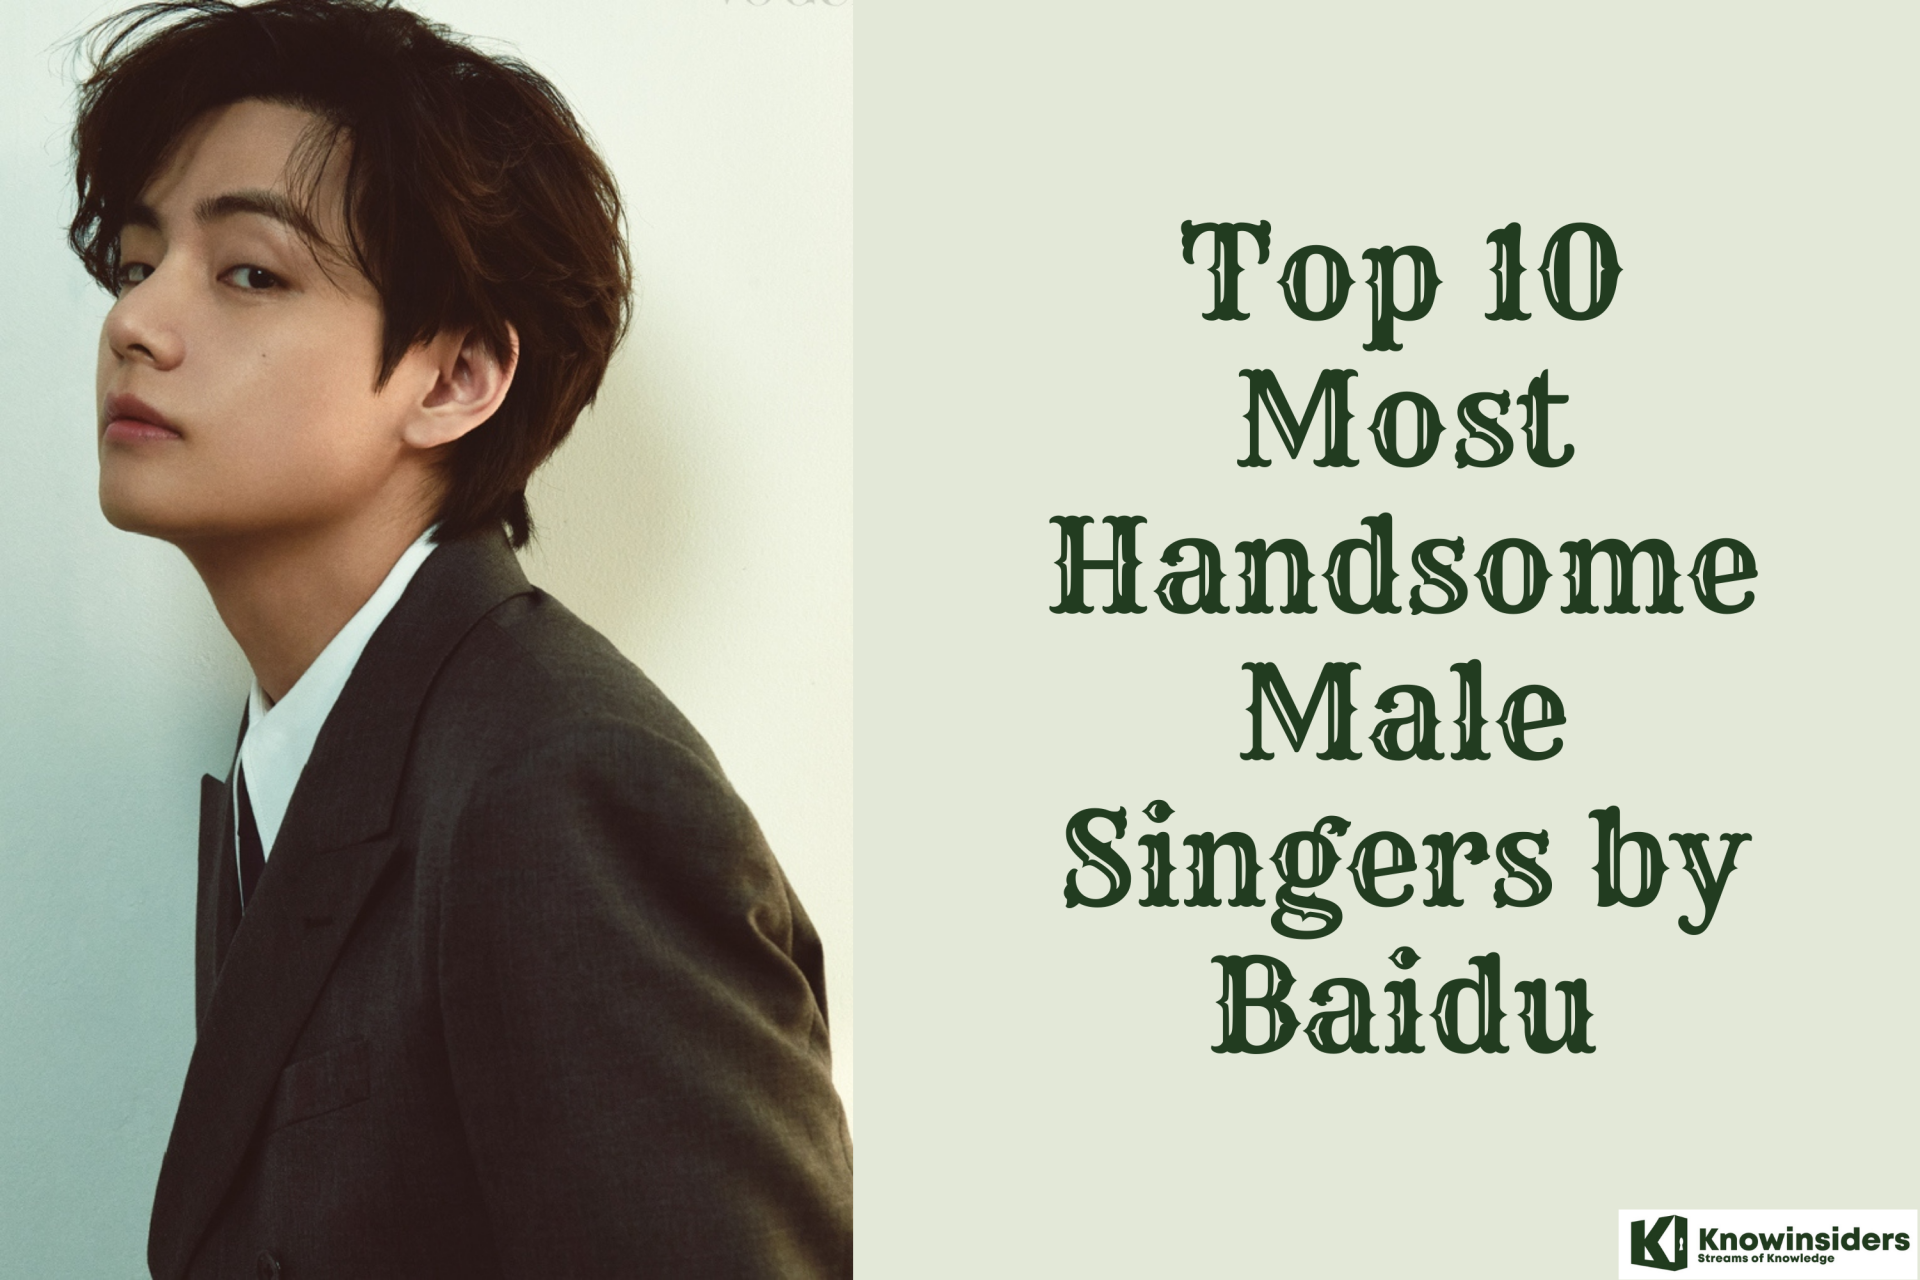 Top 10 Most Handsome Male Singers by Baidu